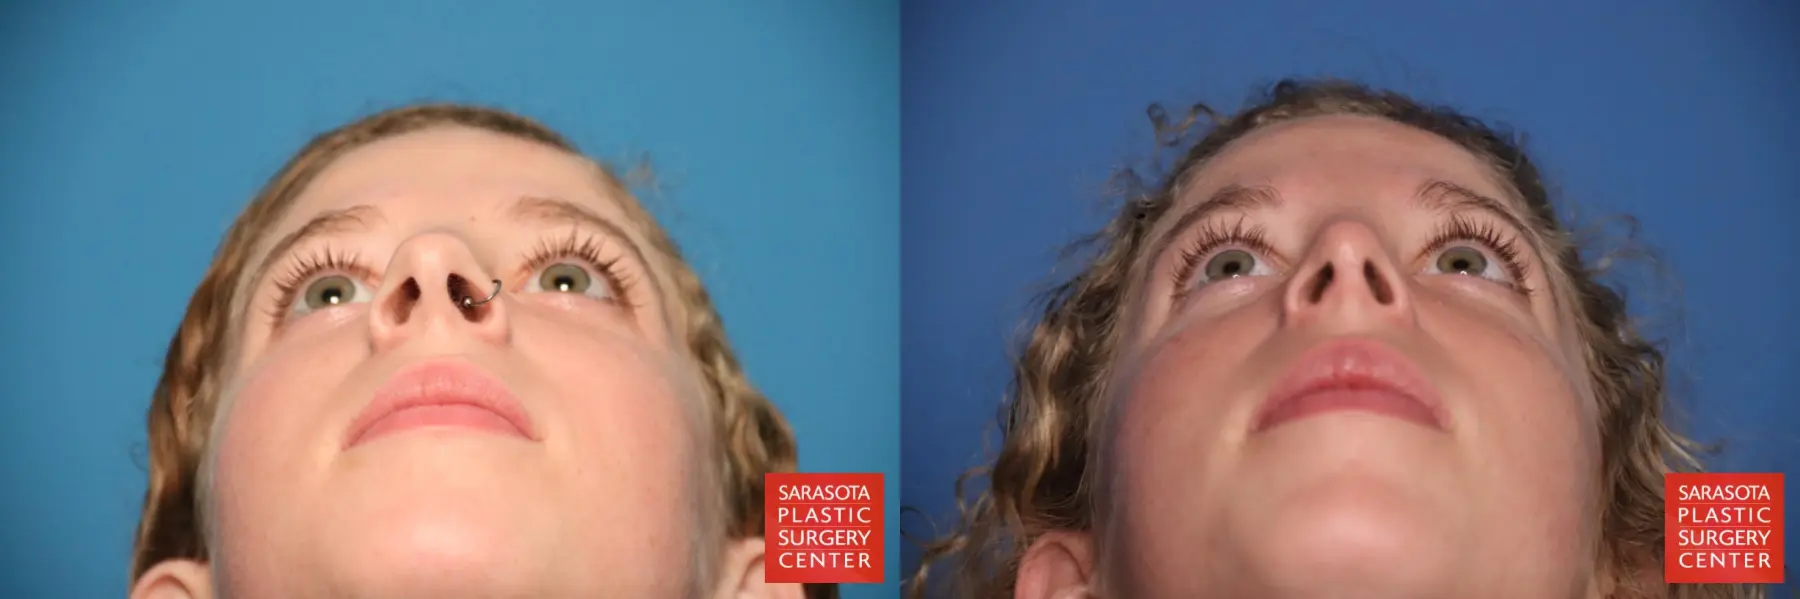 Rhinoplasty: Patient 7 - Before and After 6